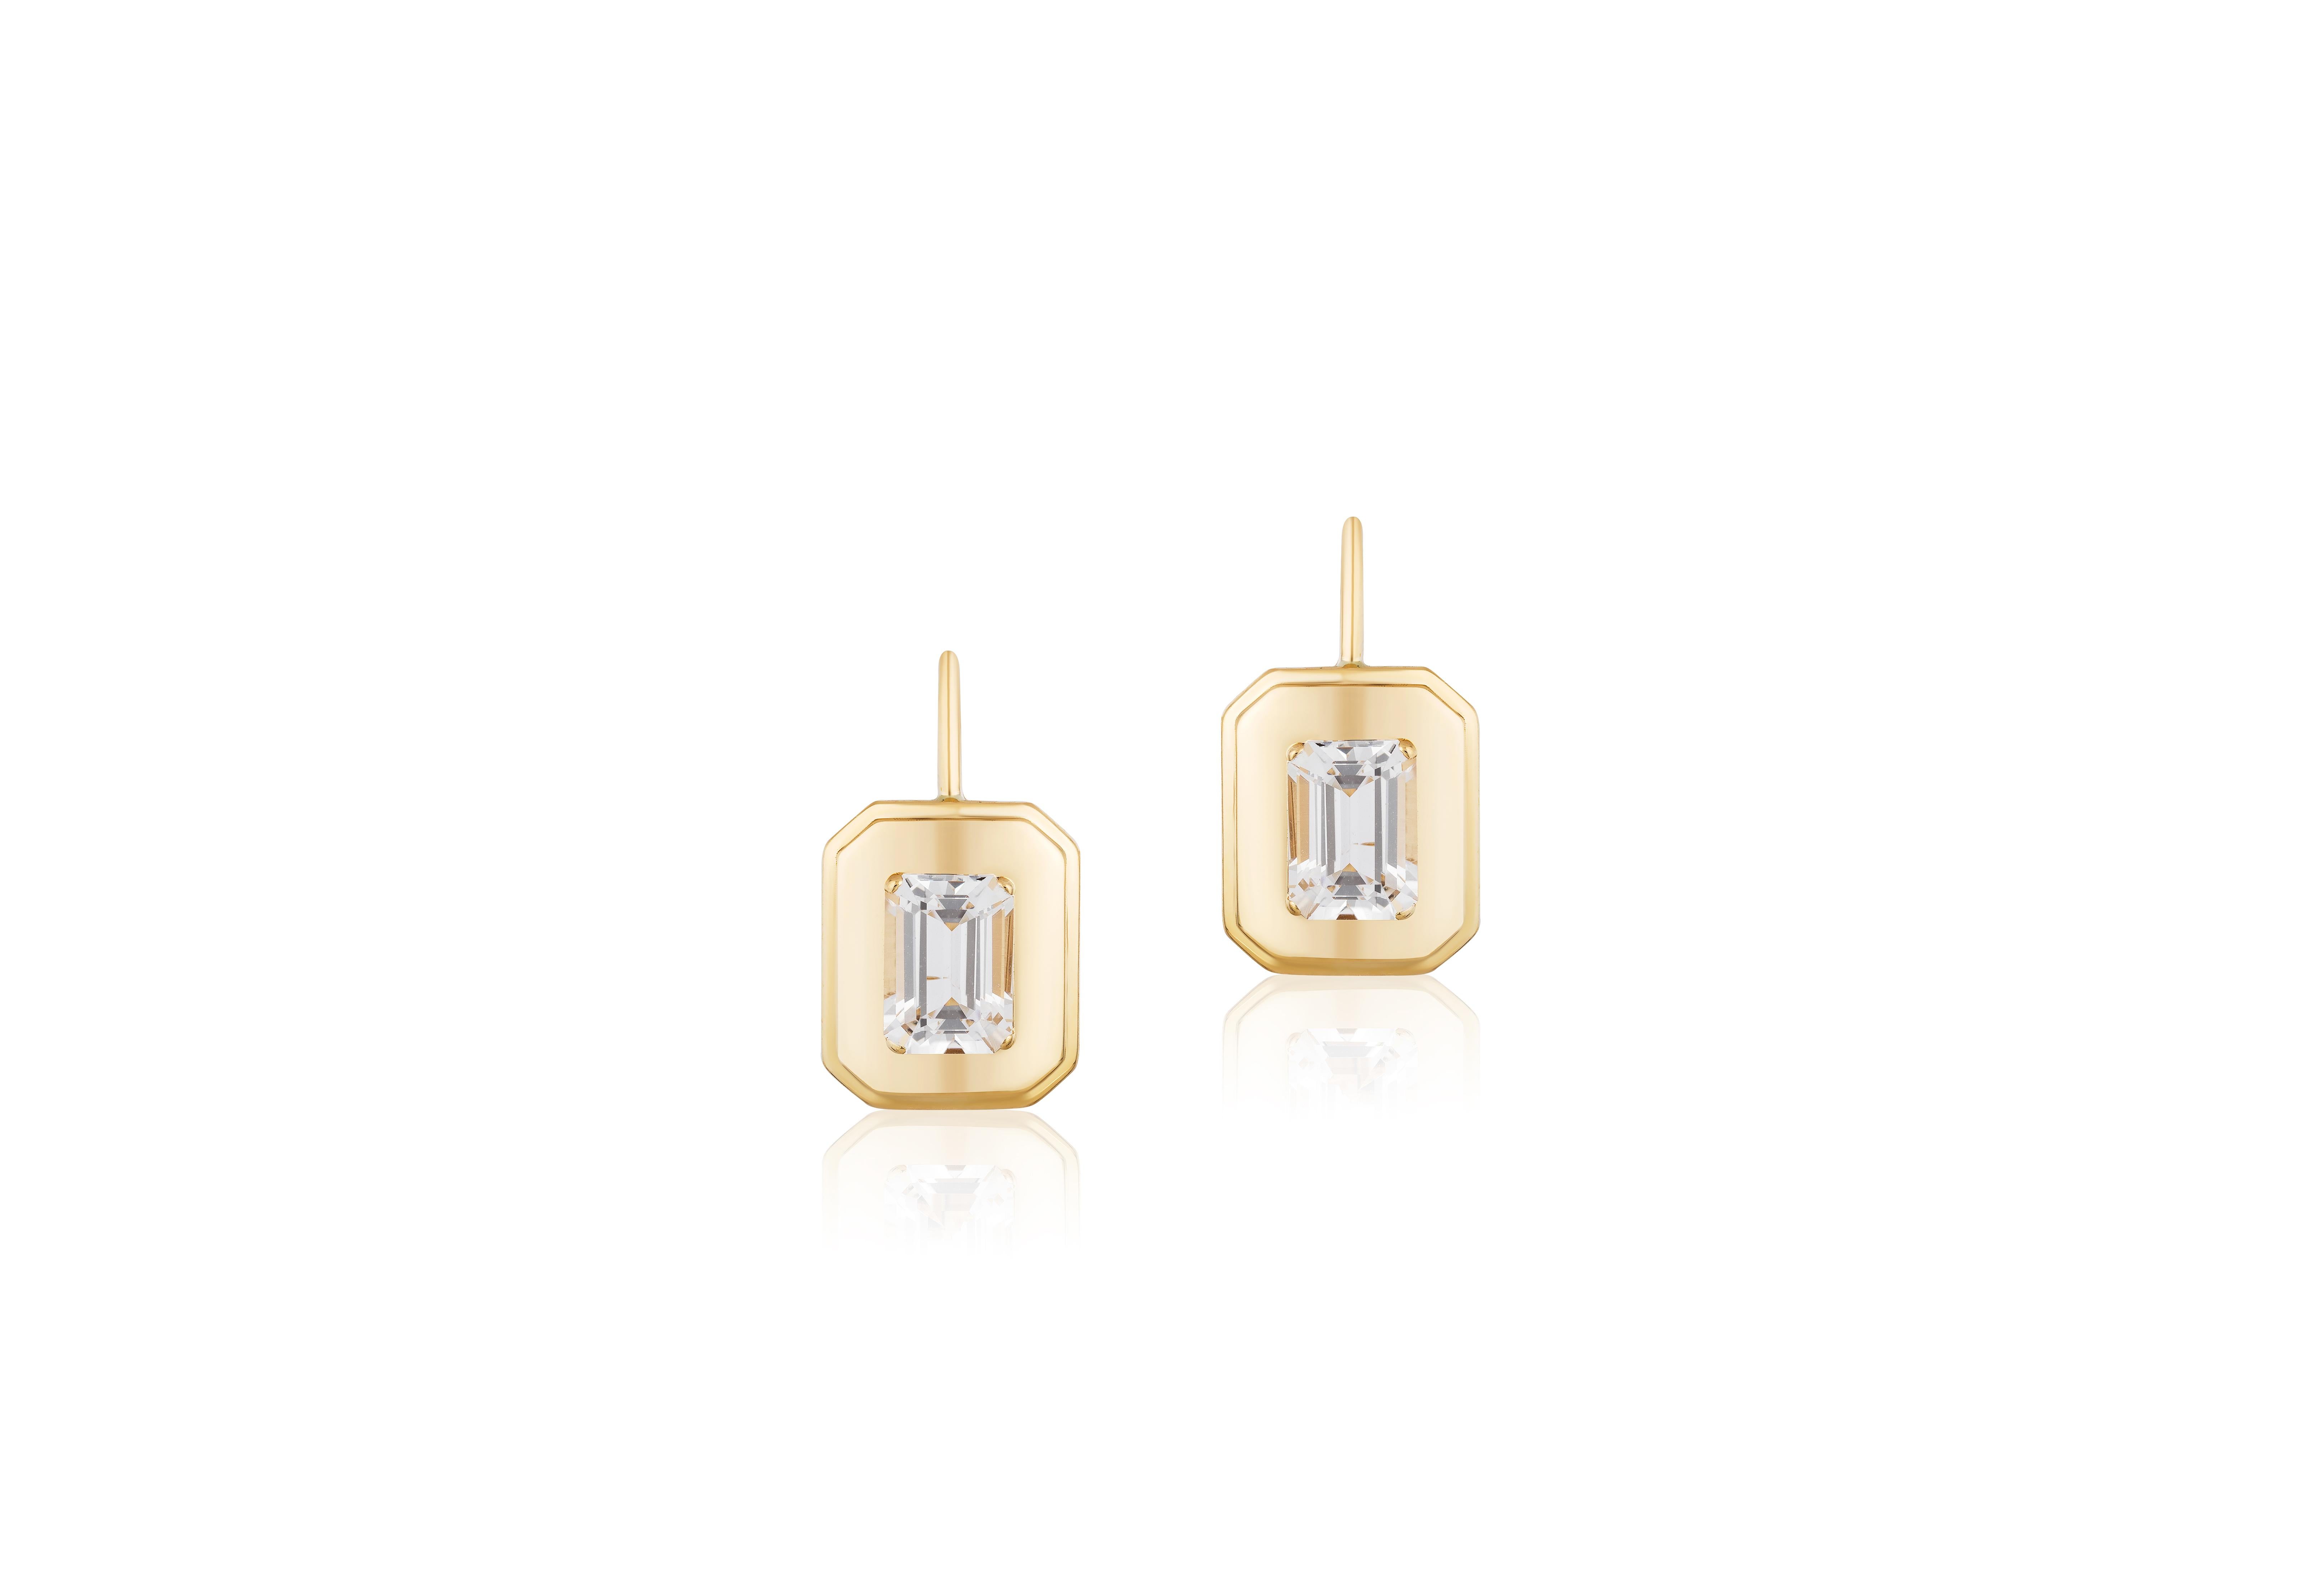 These unique earrings are a Rock Crystal Emerald Cut, with Lever back. From our ‘Queen’ Collection, it was inspired by royalty, but with a modern twist. The combination of Gold, and Rock Crystal represents power, richness and passion of a true